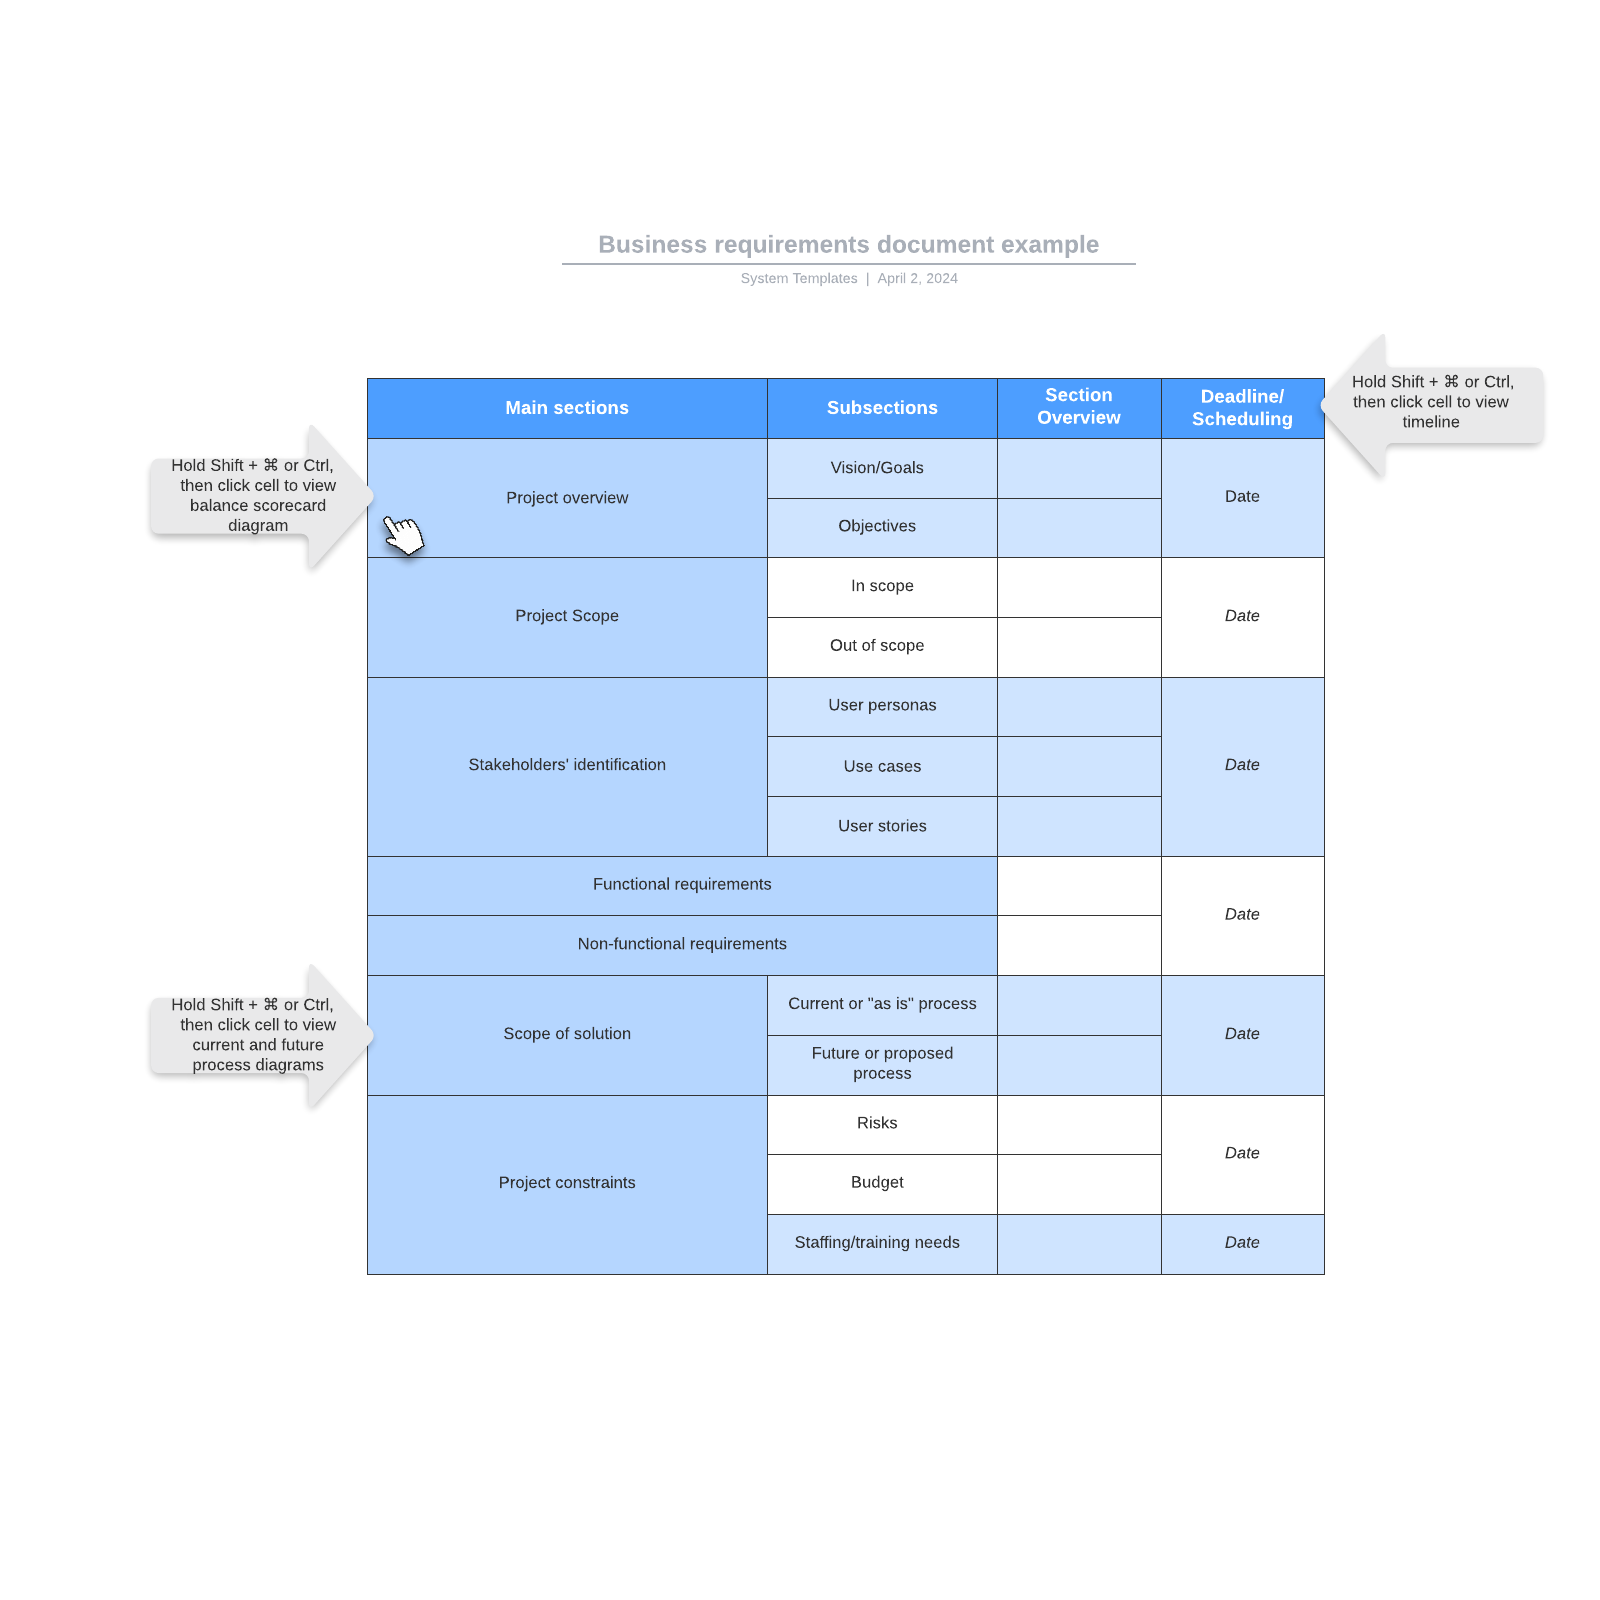 Business requirements document example example